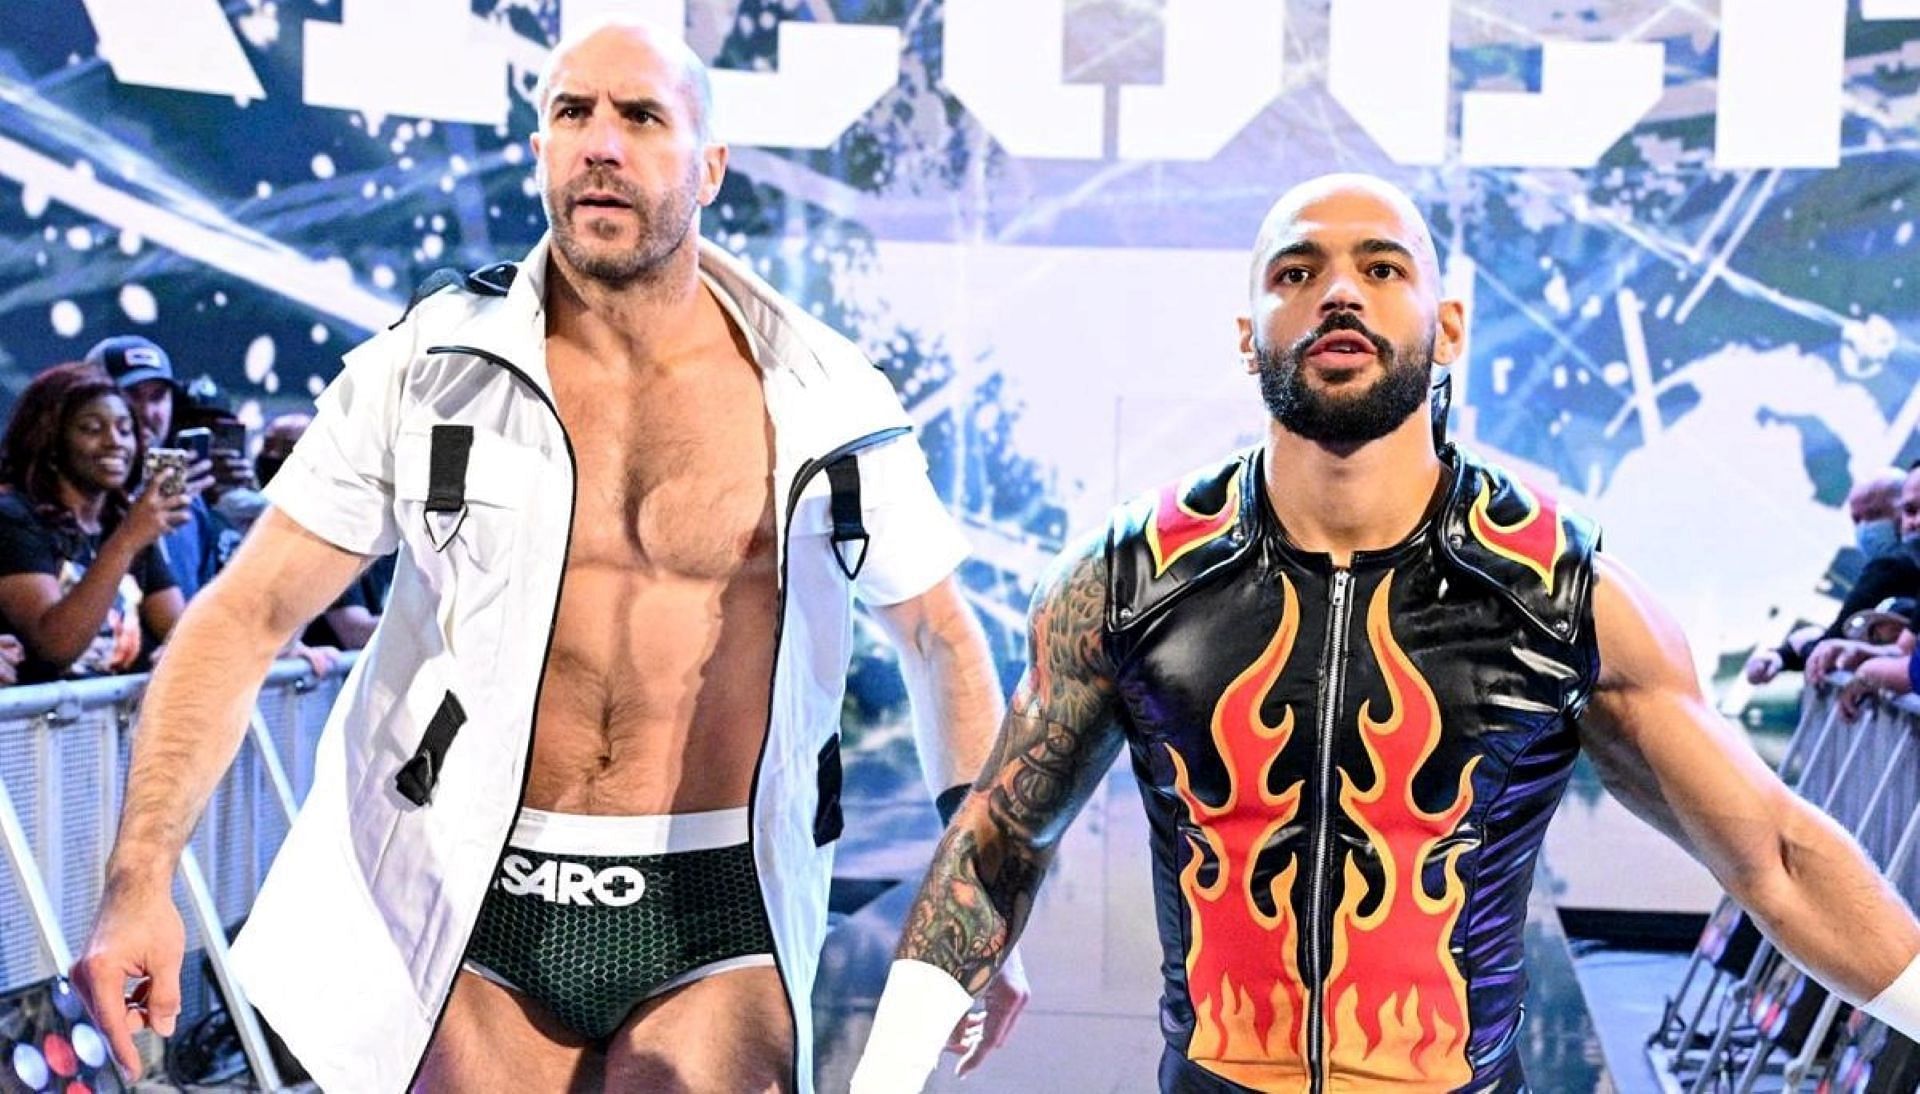 Cesaro walks down to the ring with Ricochet.